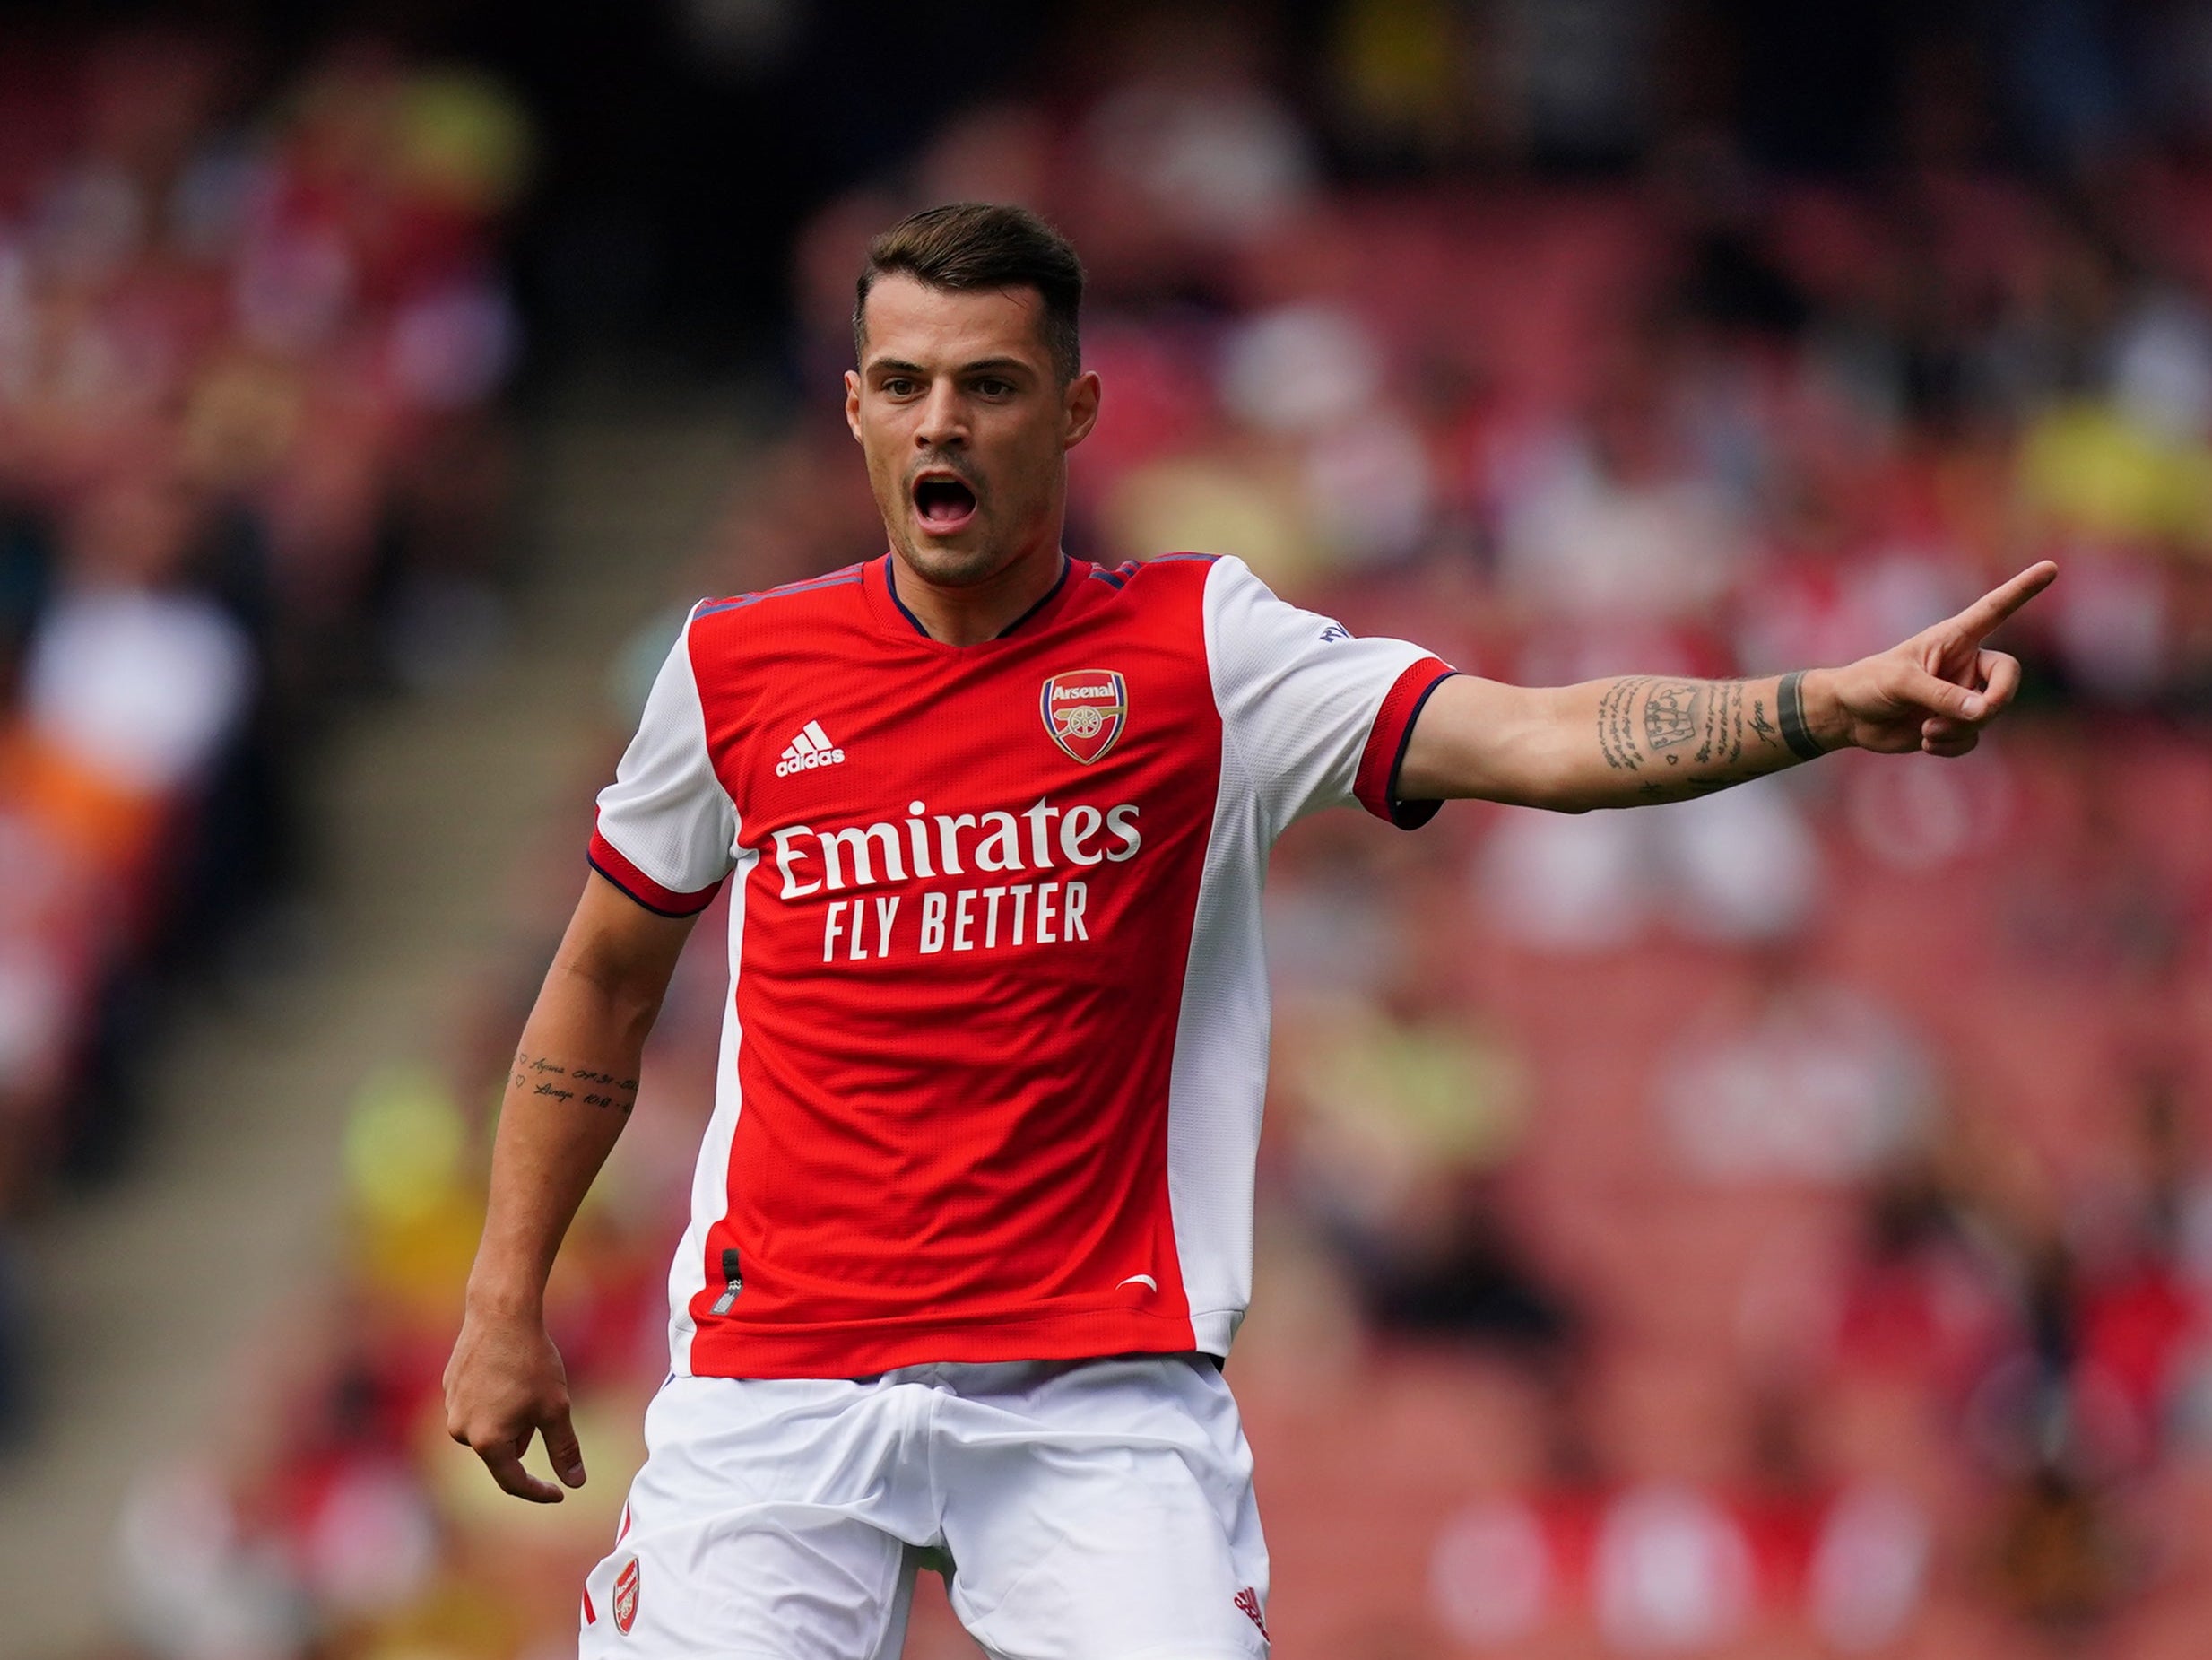 Arsenal midfielder Granit Xhaka looks set to remain at the club (Aaron Chown/PA)